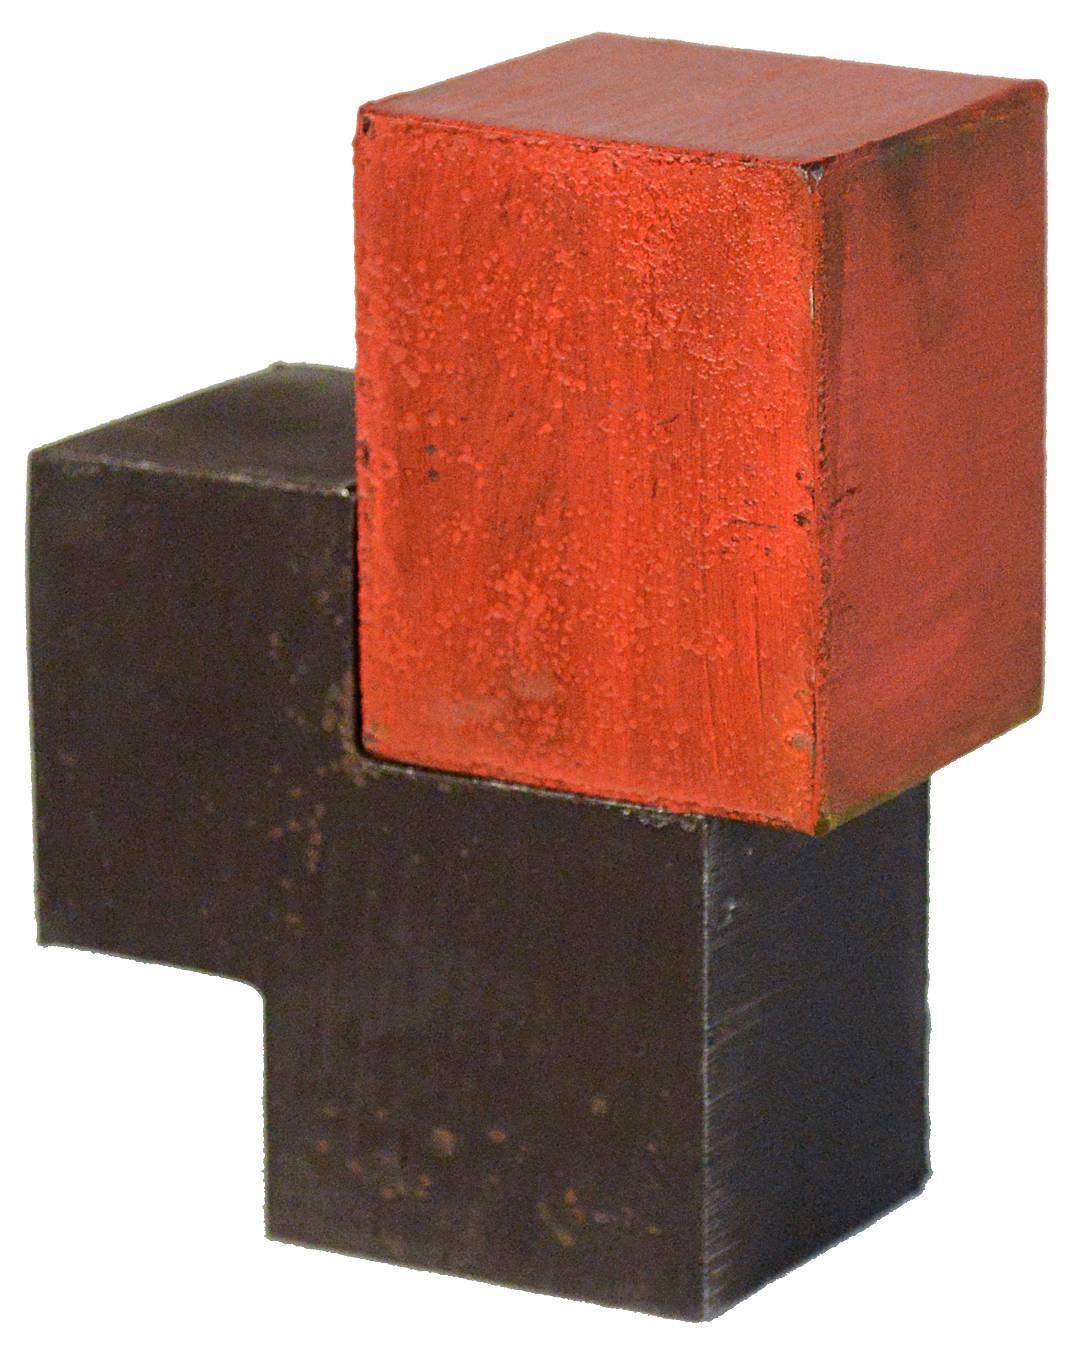 Resting Red - Sculpture by Jonathan Waters